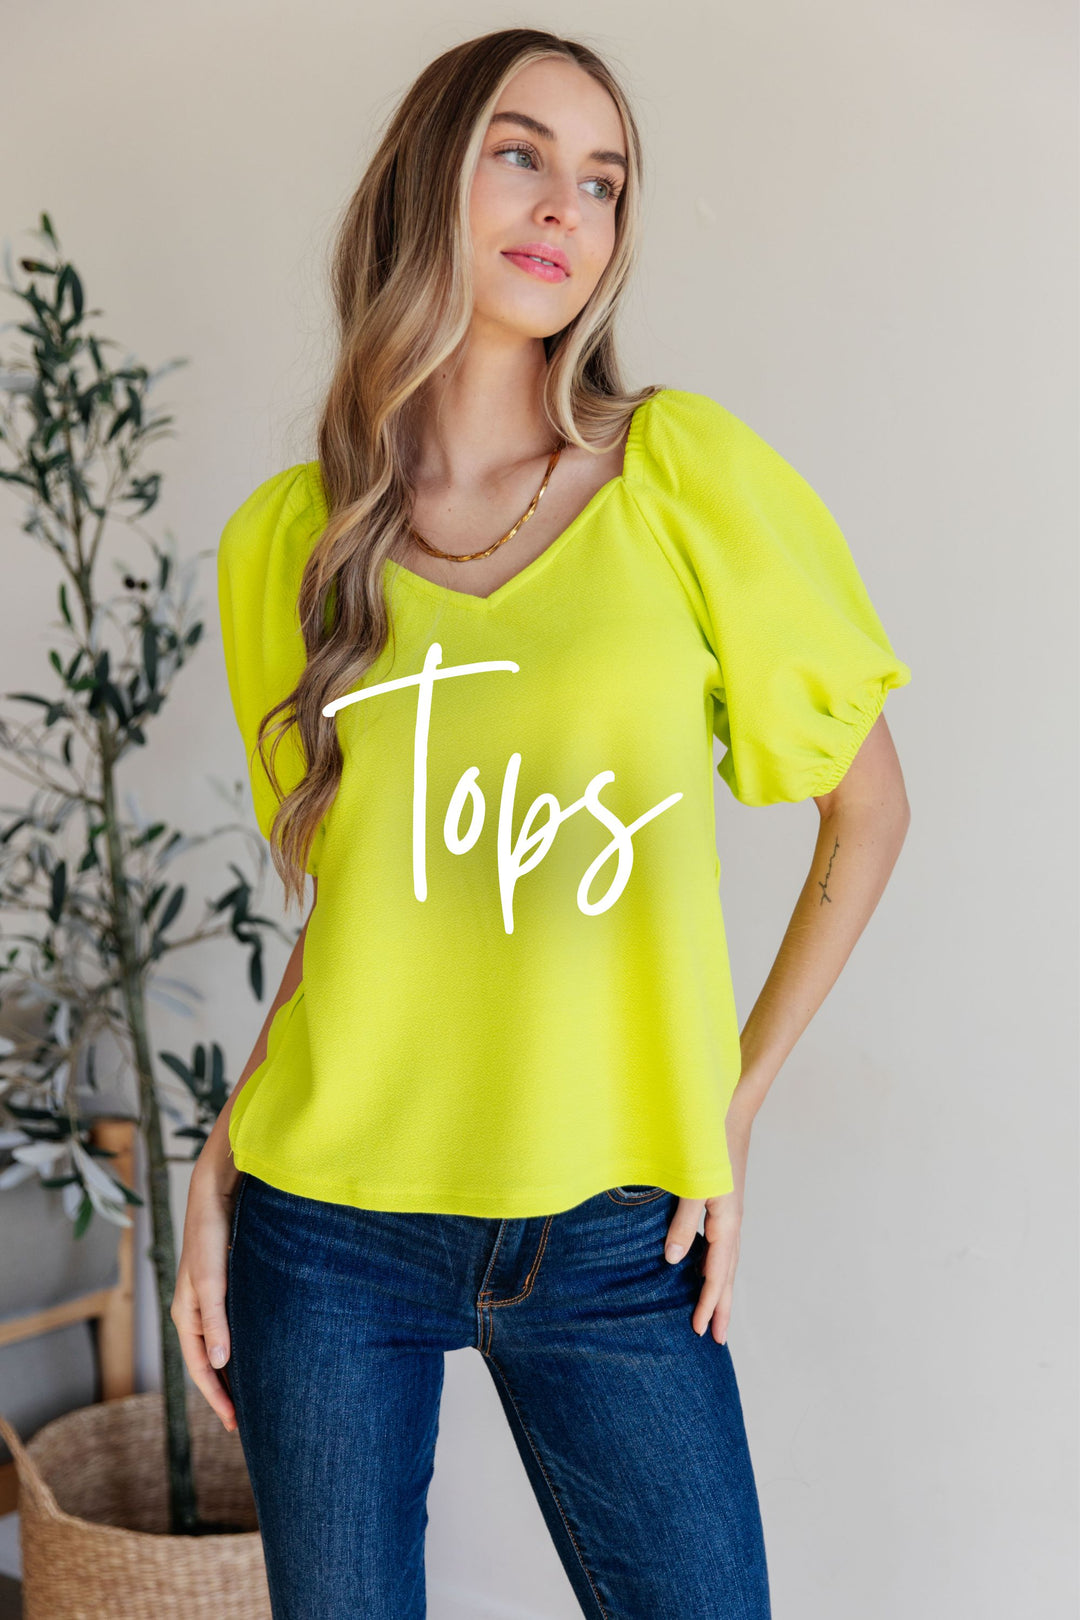 Women's Boutique Tops - Inspired Eye Boutique